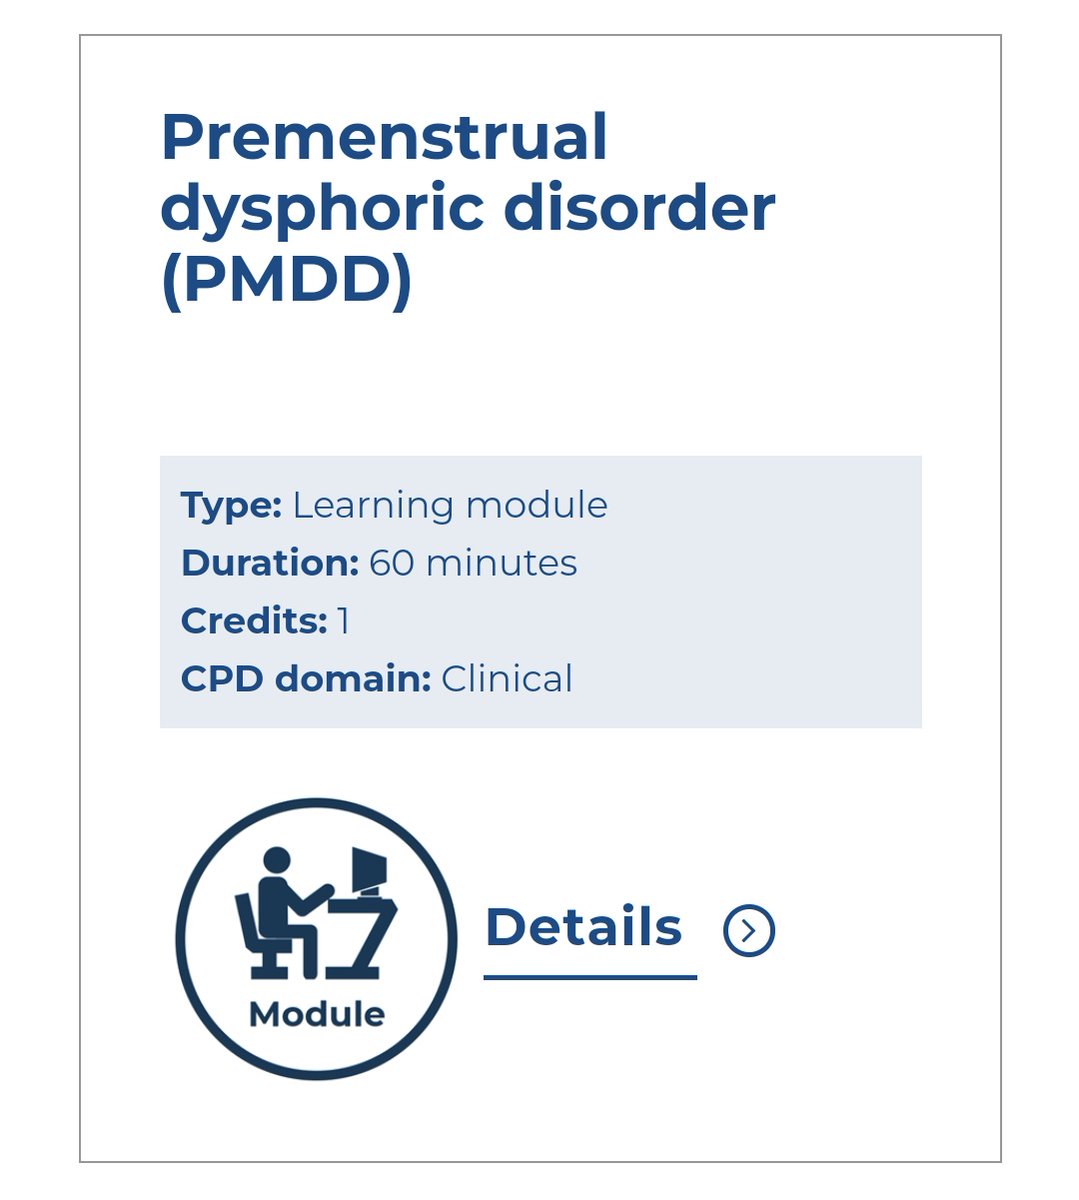 For a number of months now @sophiebehrman, @AriannaDiFlorio & myself have been working on a CPD module on #PMDD for @rcpsych. It's gone live this week, please check it out elearninghub.rcpsych.ac.uk/products/Preme… Huge thanks to the wonderful ladies who courageously shared their experiences.